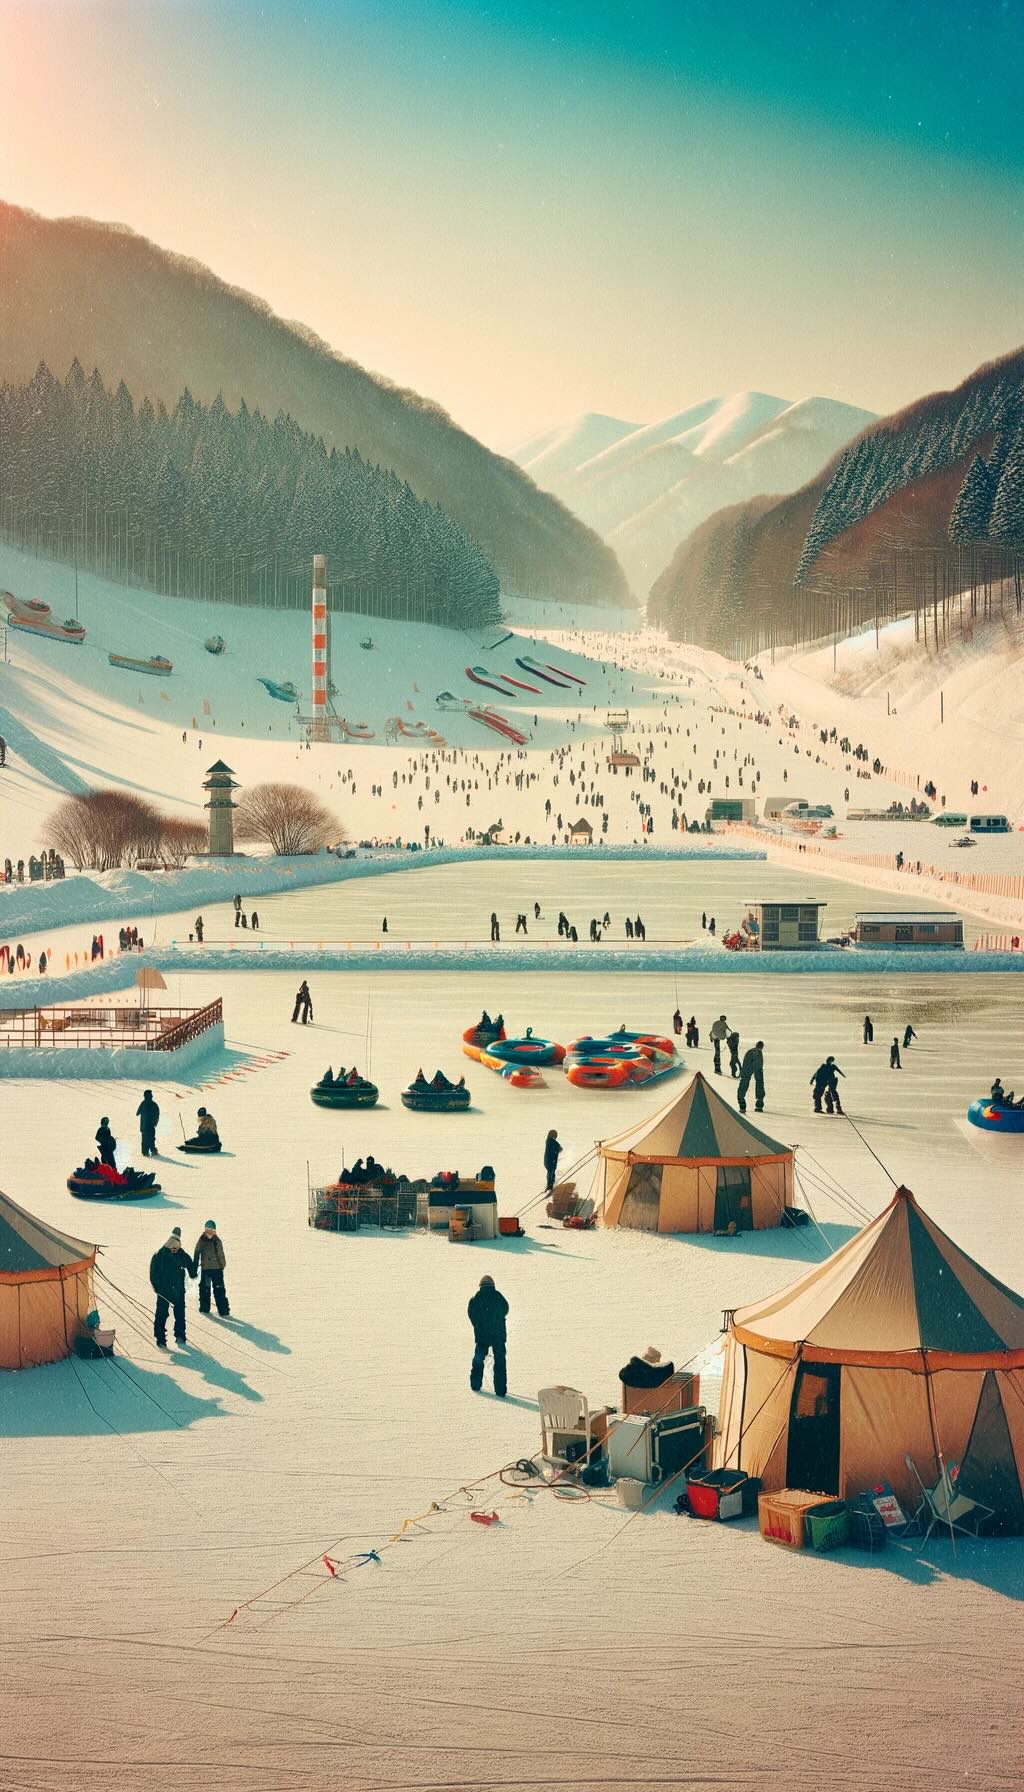 Serene winter scene in Nagano, Japan, showcasing a variety of winter activities including ice fishing, ice skating, and snow tubing.